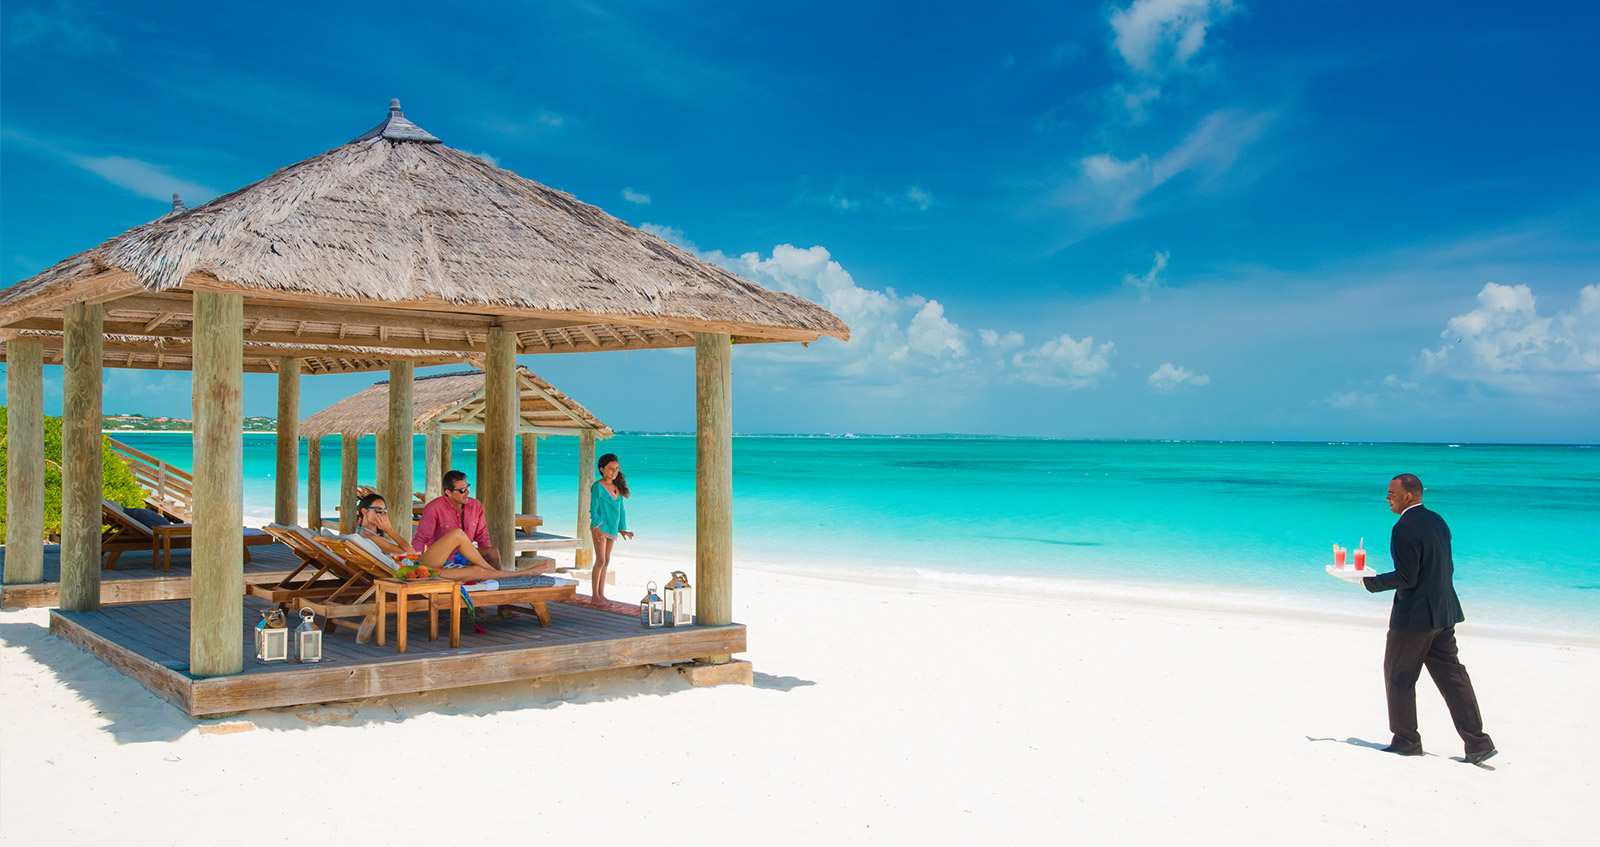 Beaches® Turks & Caicos: All-Inclusive Holidays [Official]